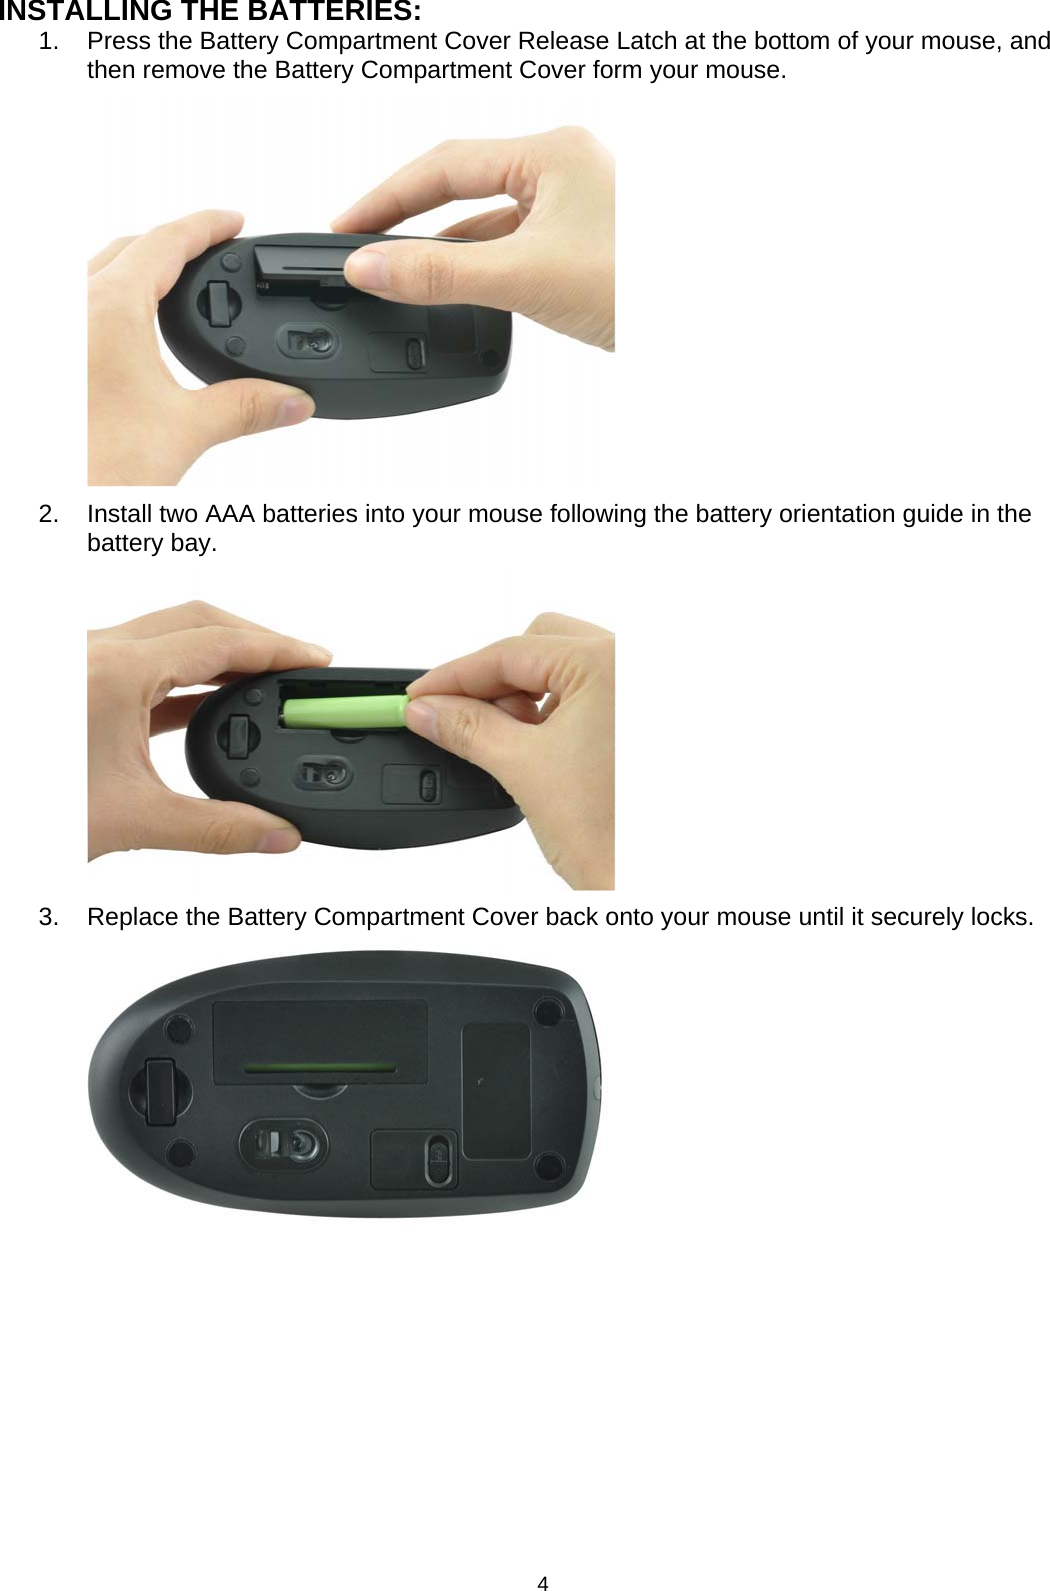 4 INSTALLING THE BATTERIES: 1.  Press the Battery Compartment Cover Release Latch at the bottom of your mouse, and then remove the Battery Compartment Cover form your mouse.          2.  Install two AAA batteries into your mouse following the battery orientation guide in the battery bay.          3.  Replace the Battery Compartment Cover back onto your mouse until it securely locks.                